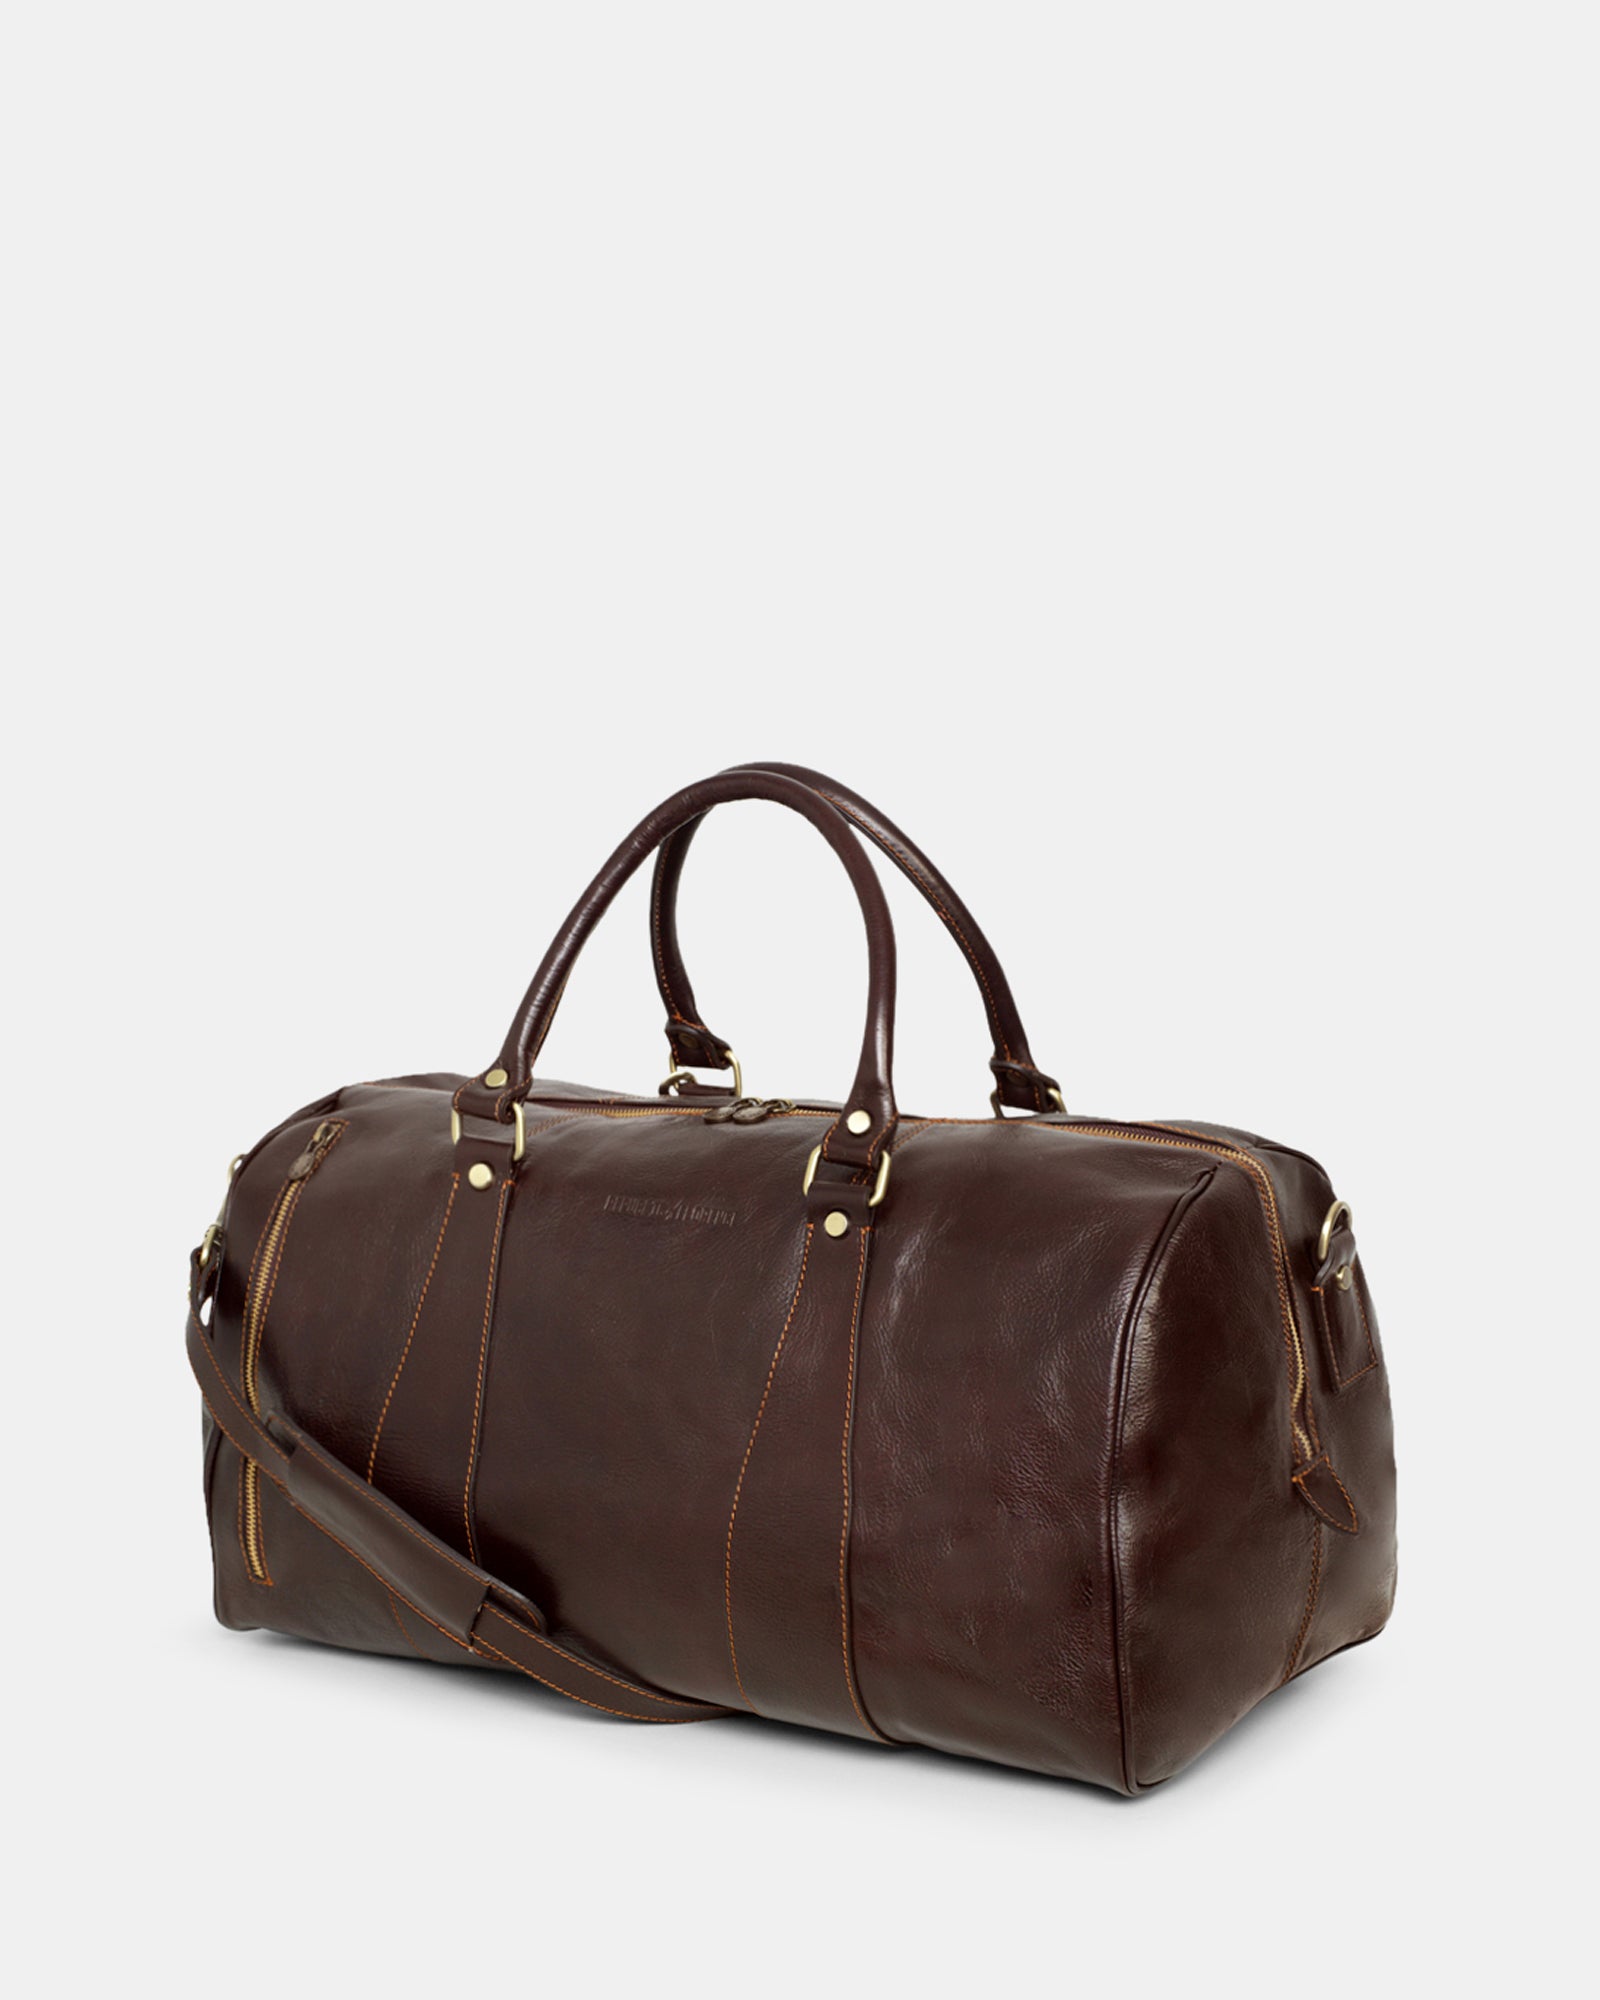 Home | Leathershop - Buy Affordable Italian Leather Products Online